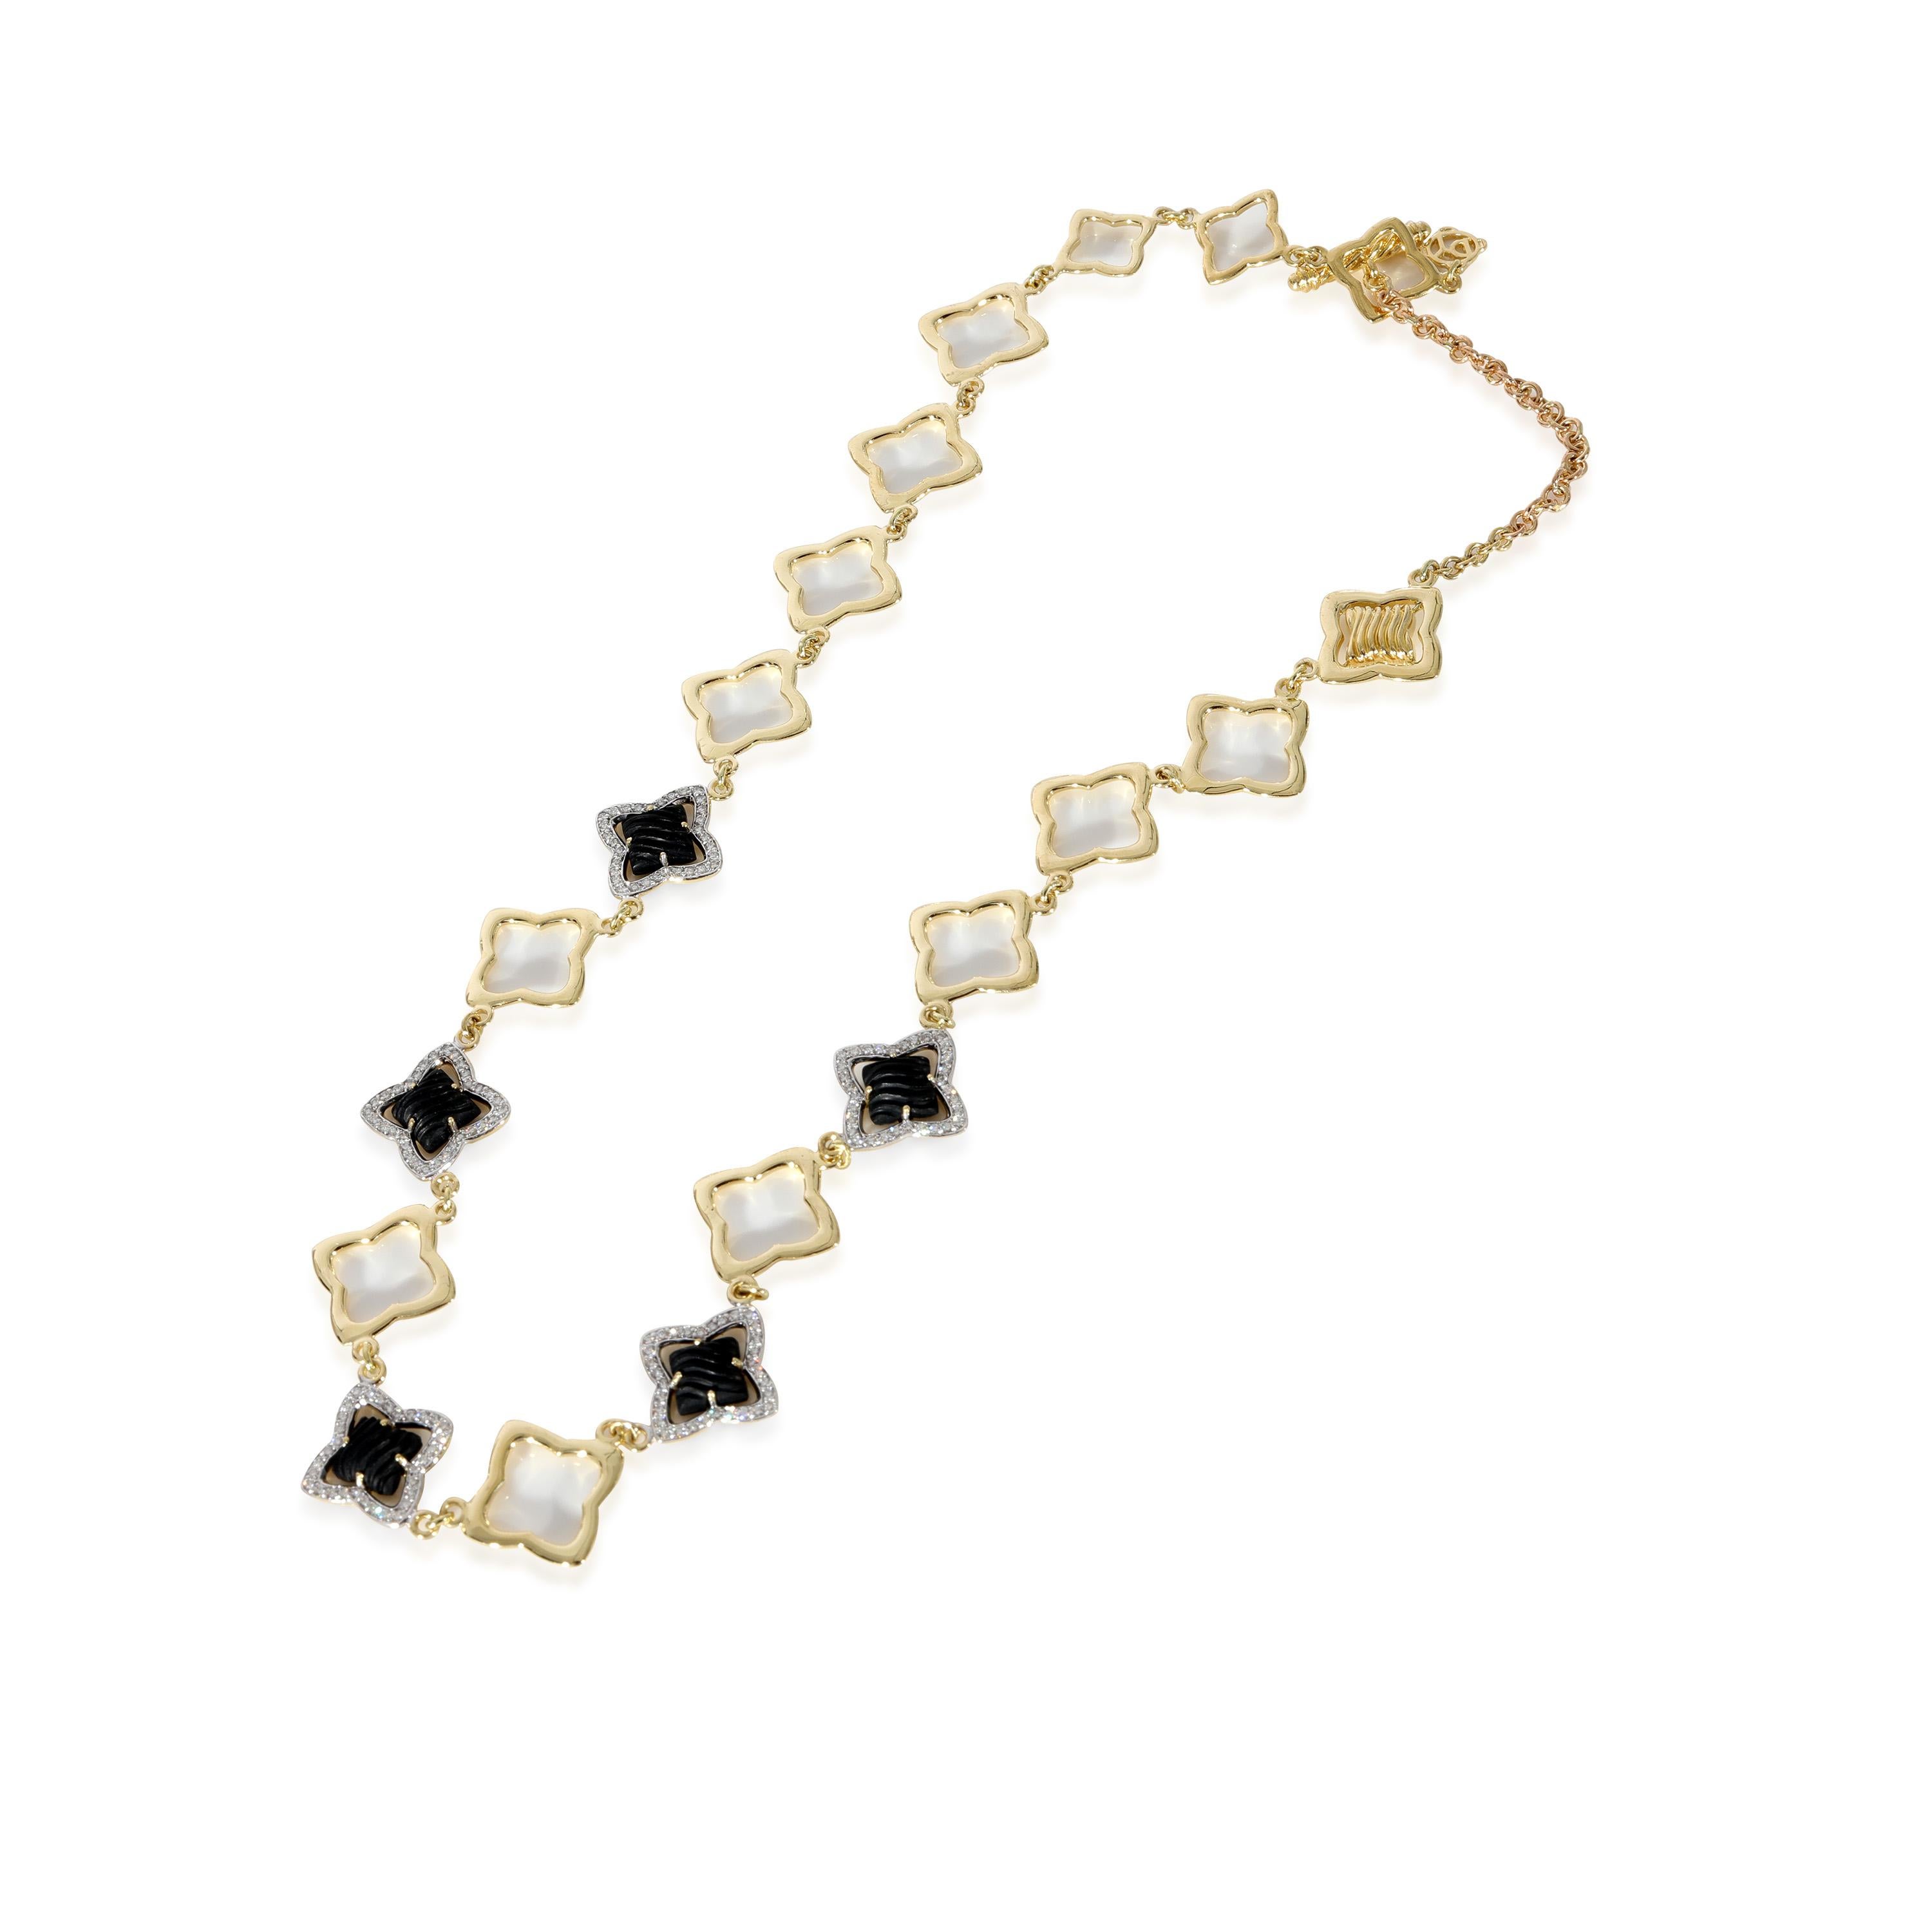 David Yurman Quadrofoil Onyx Diamond Necklace in 18k Yellow Gold 1.75 CT
 
 PRIMARY DETAILS
 SKU: 128155
 Listing Title: David Yurman Quadrofoil Onyx Diamond Necklace in 18k Yellow Gold 1.75 CT
 Condition Description: Retails for 9995 USD. In